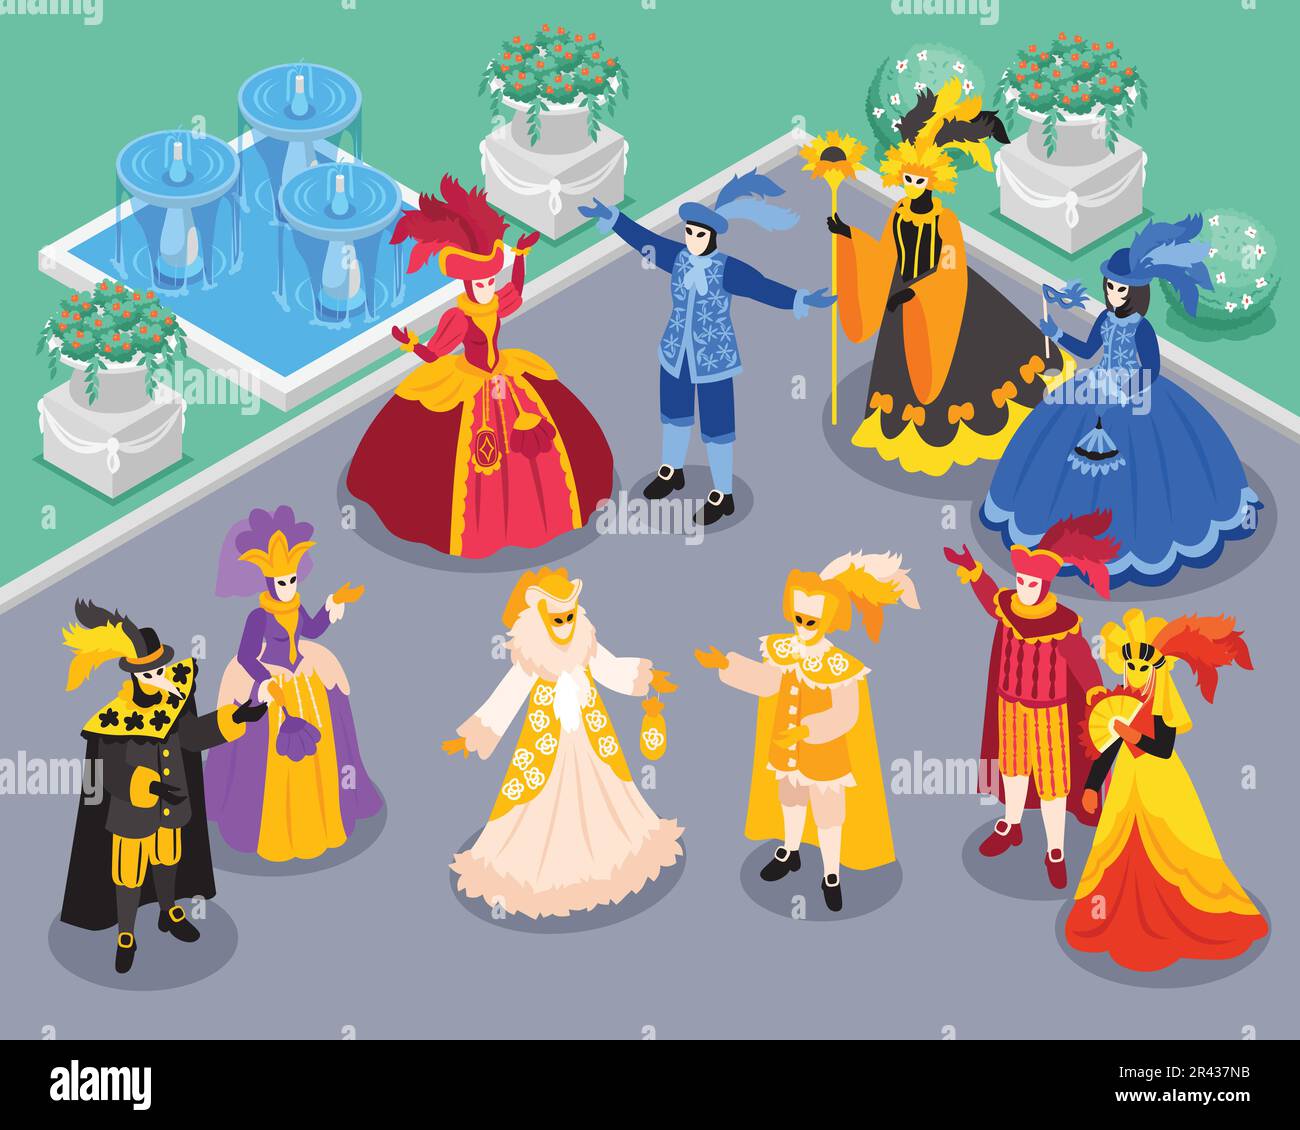 Isometric venetian costumes carnival composition with outdoor scenery of medieval park with fountains and fashionable people vector illustration Stock Vector